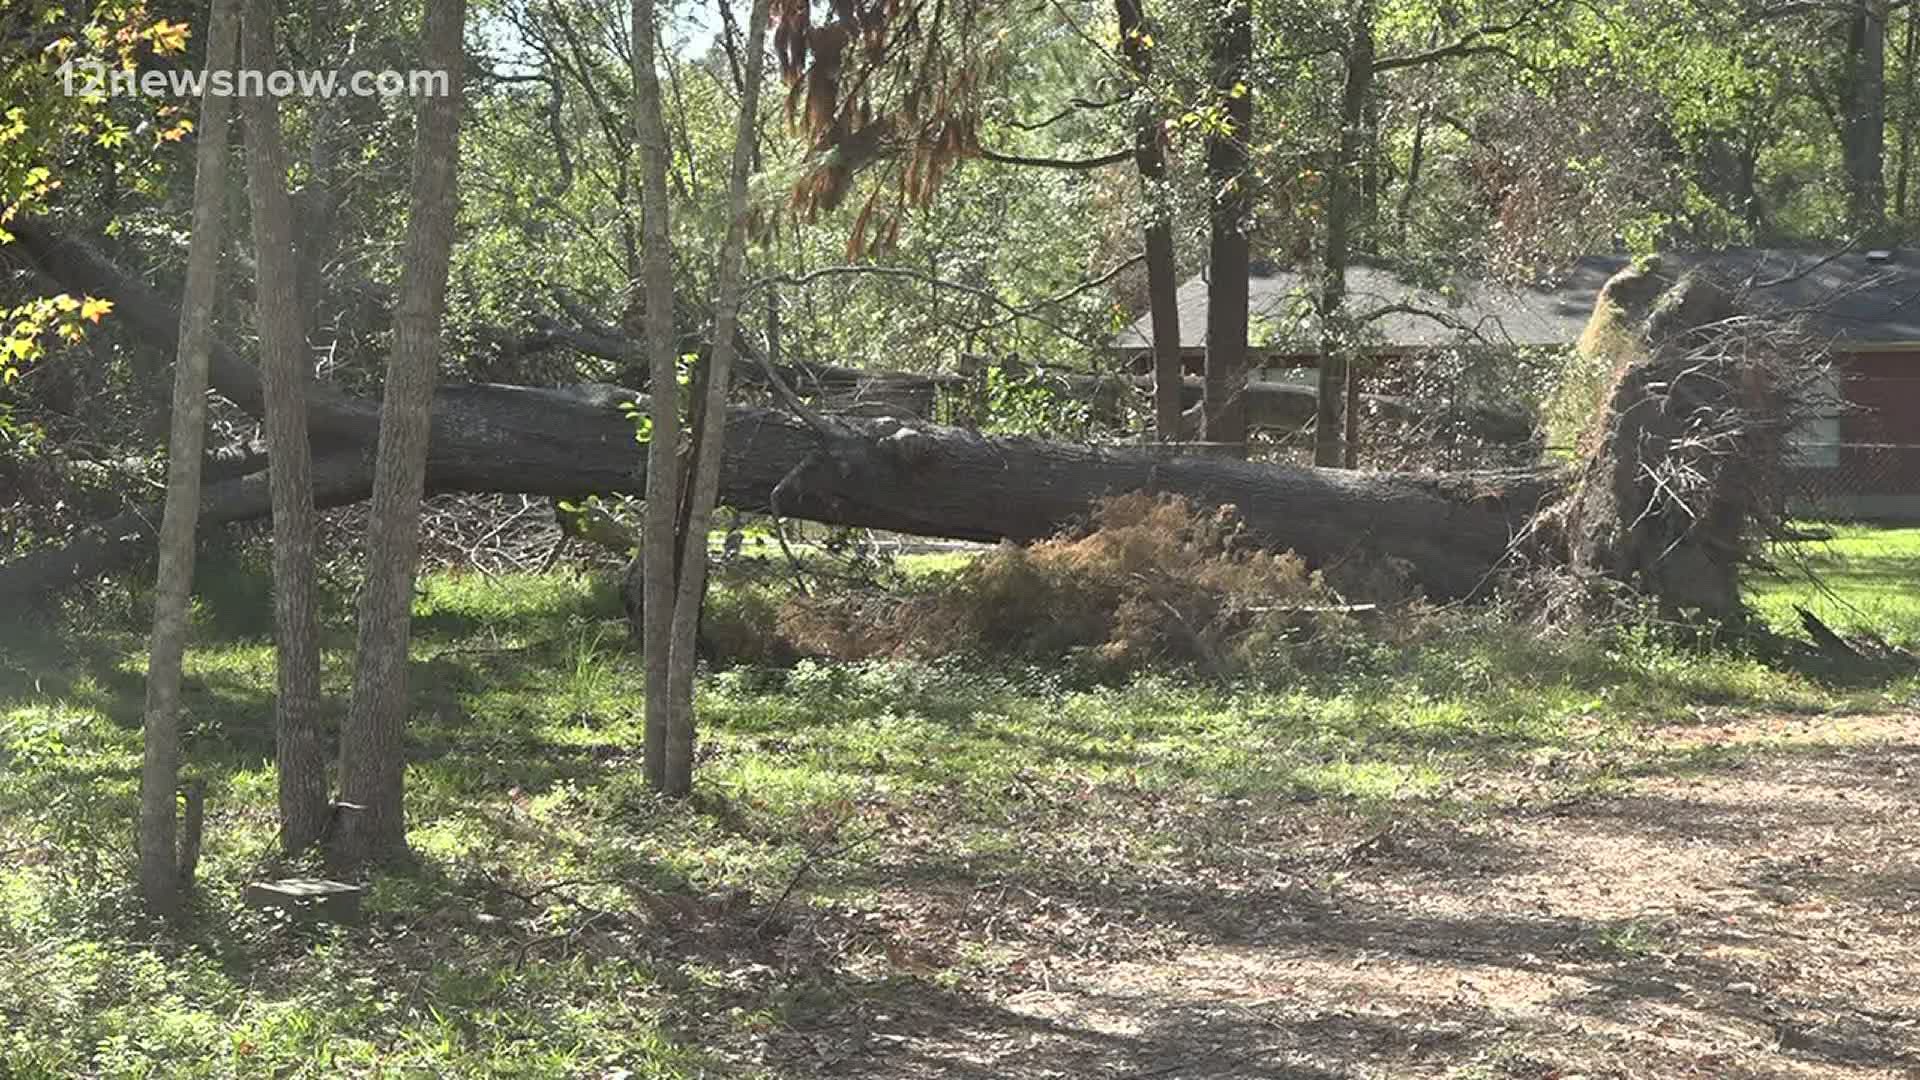 Cleanup from Hurricane Laura continues as downed trees and debris piles line the streets in Orange County months after the storm hit Southeast Texas.